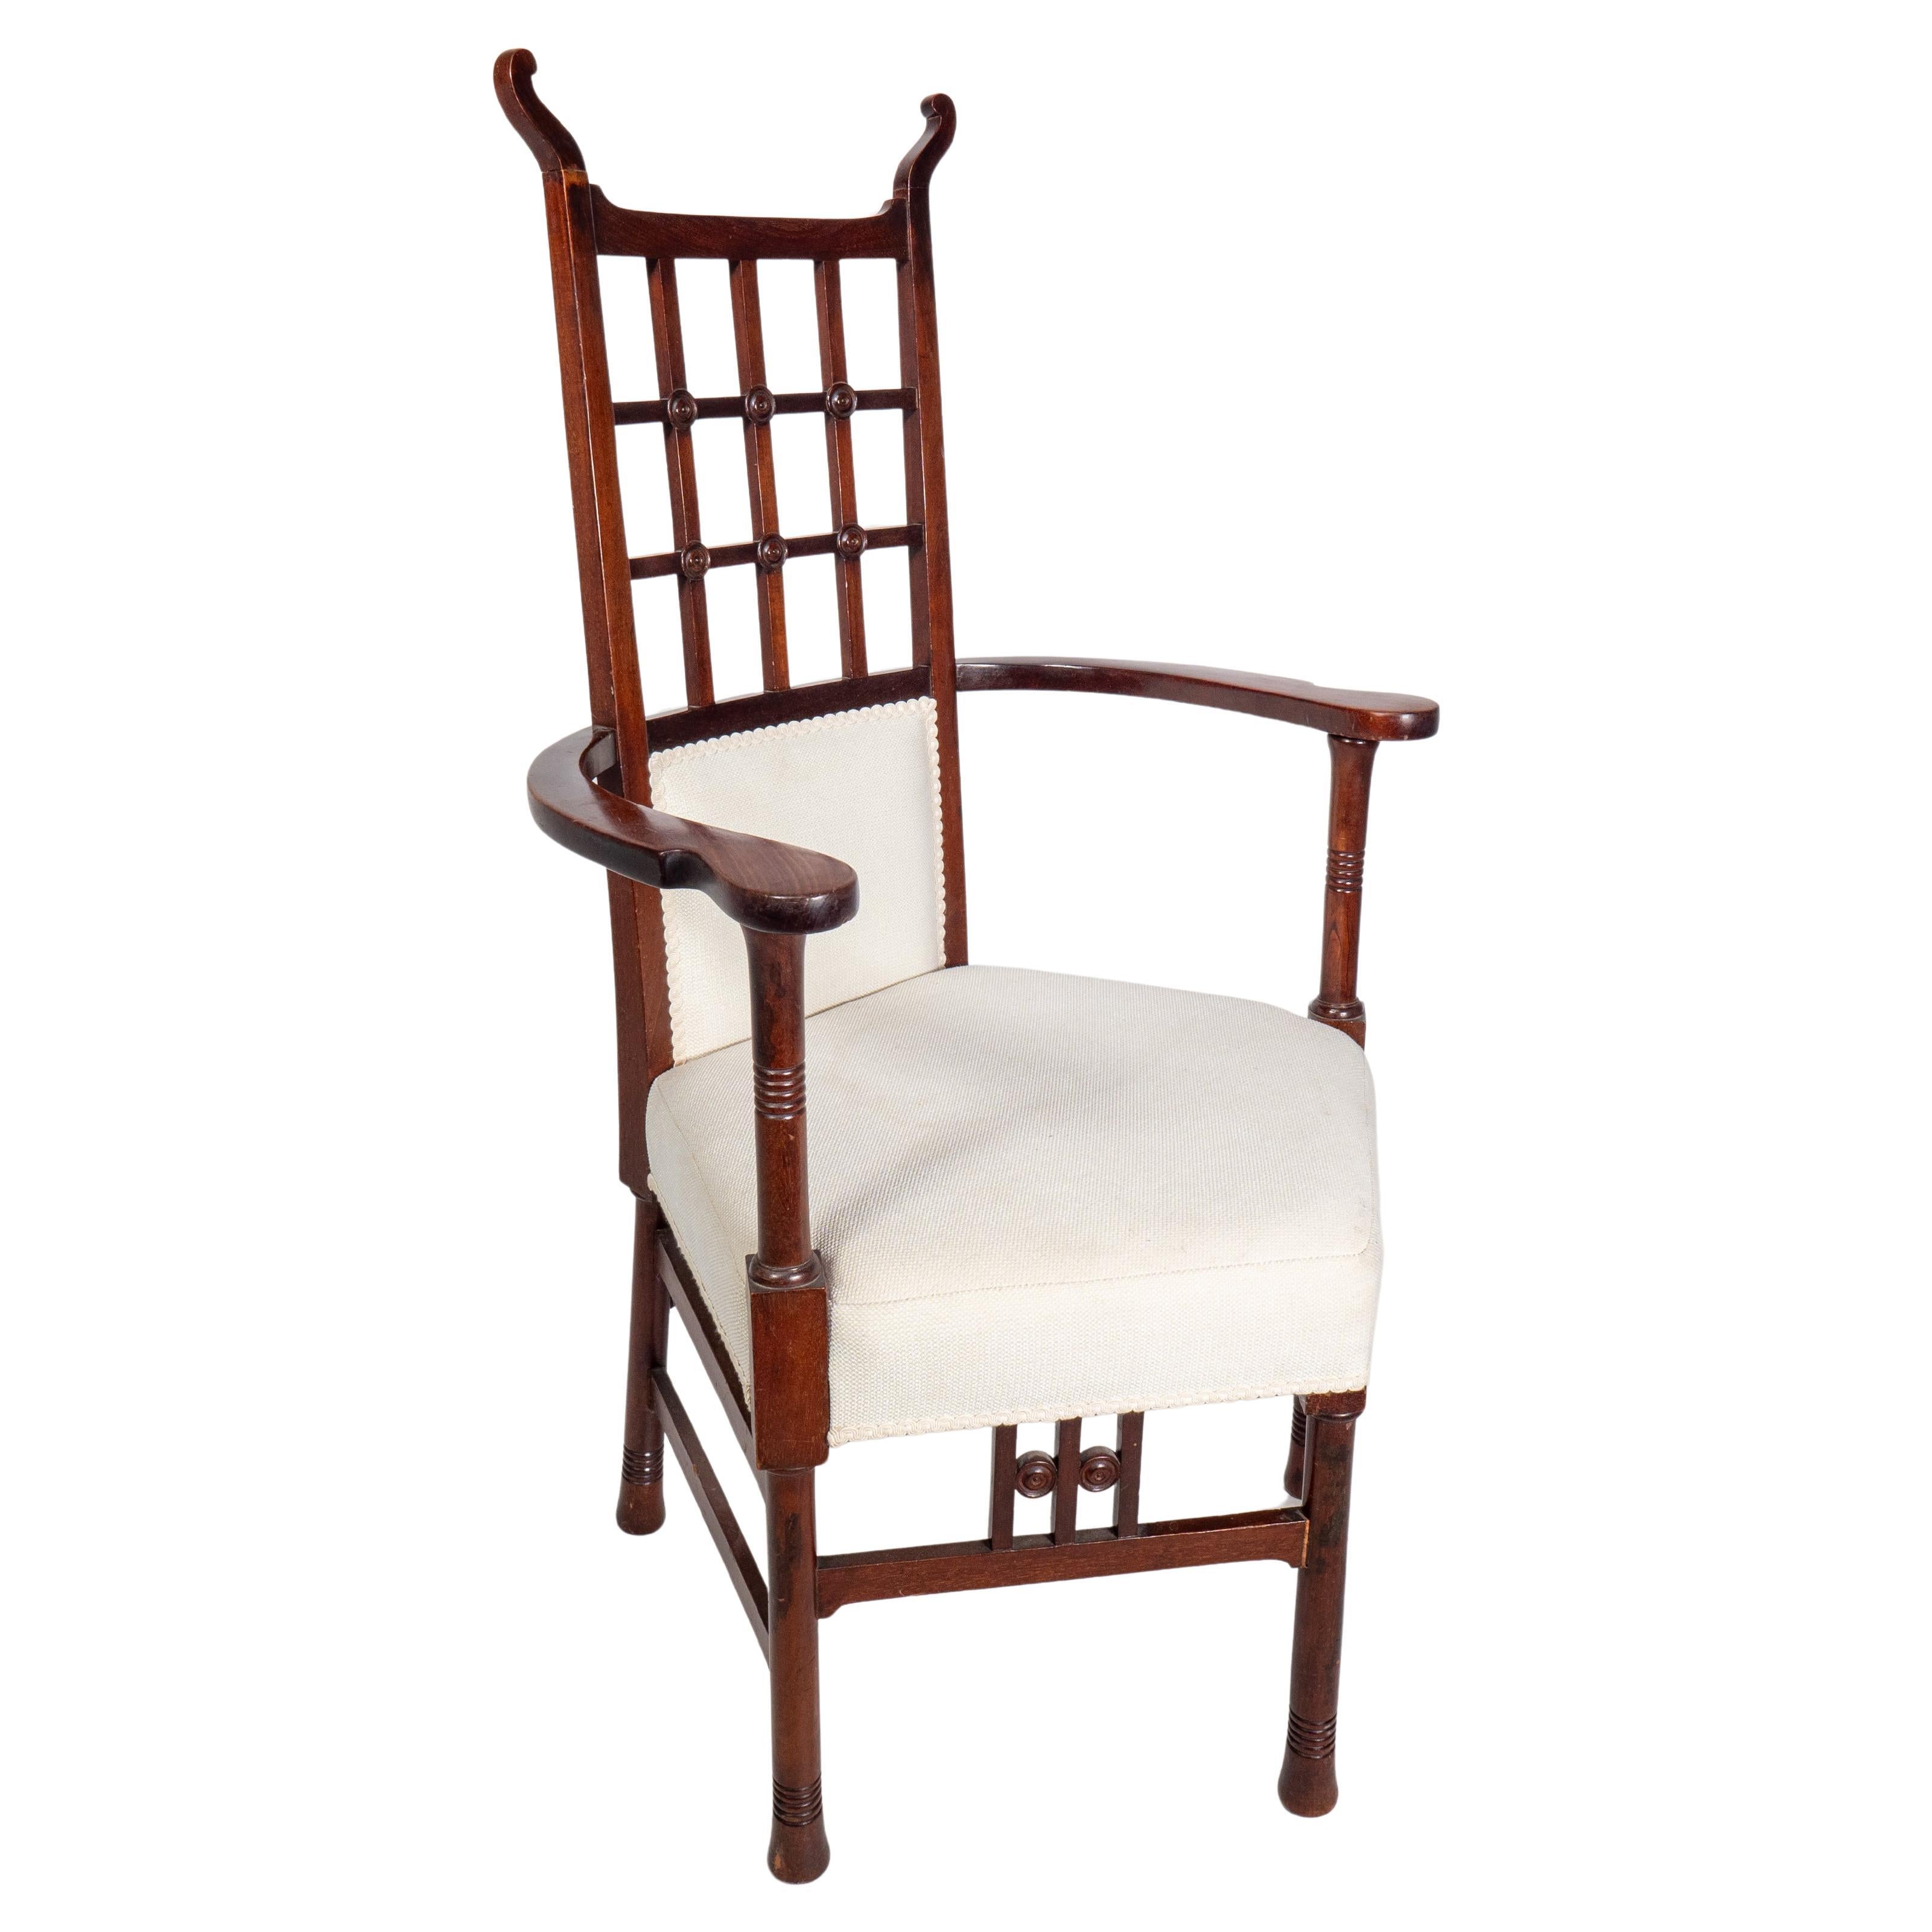 Liberty & Co probably made by William Birch. An Arts & Crafts mahogany armchair. For Sale